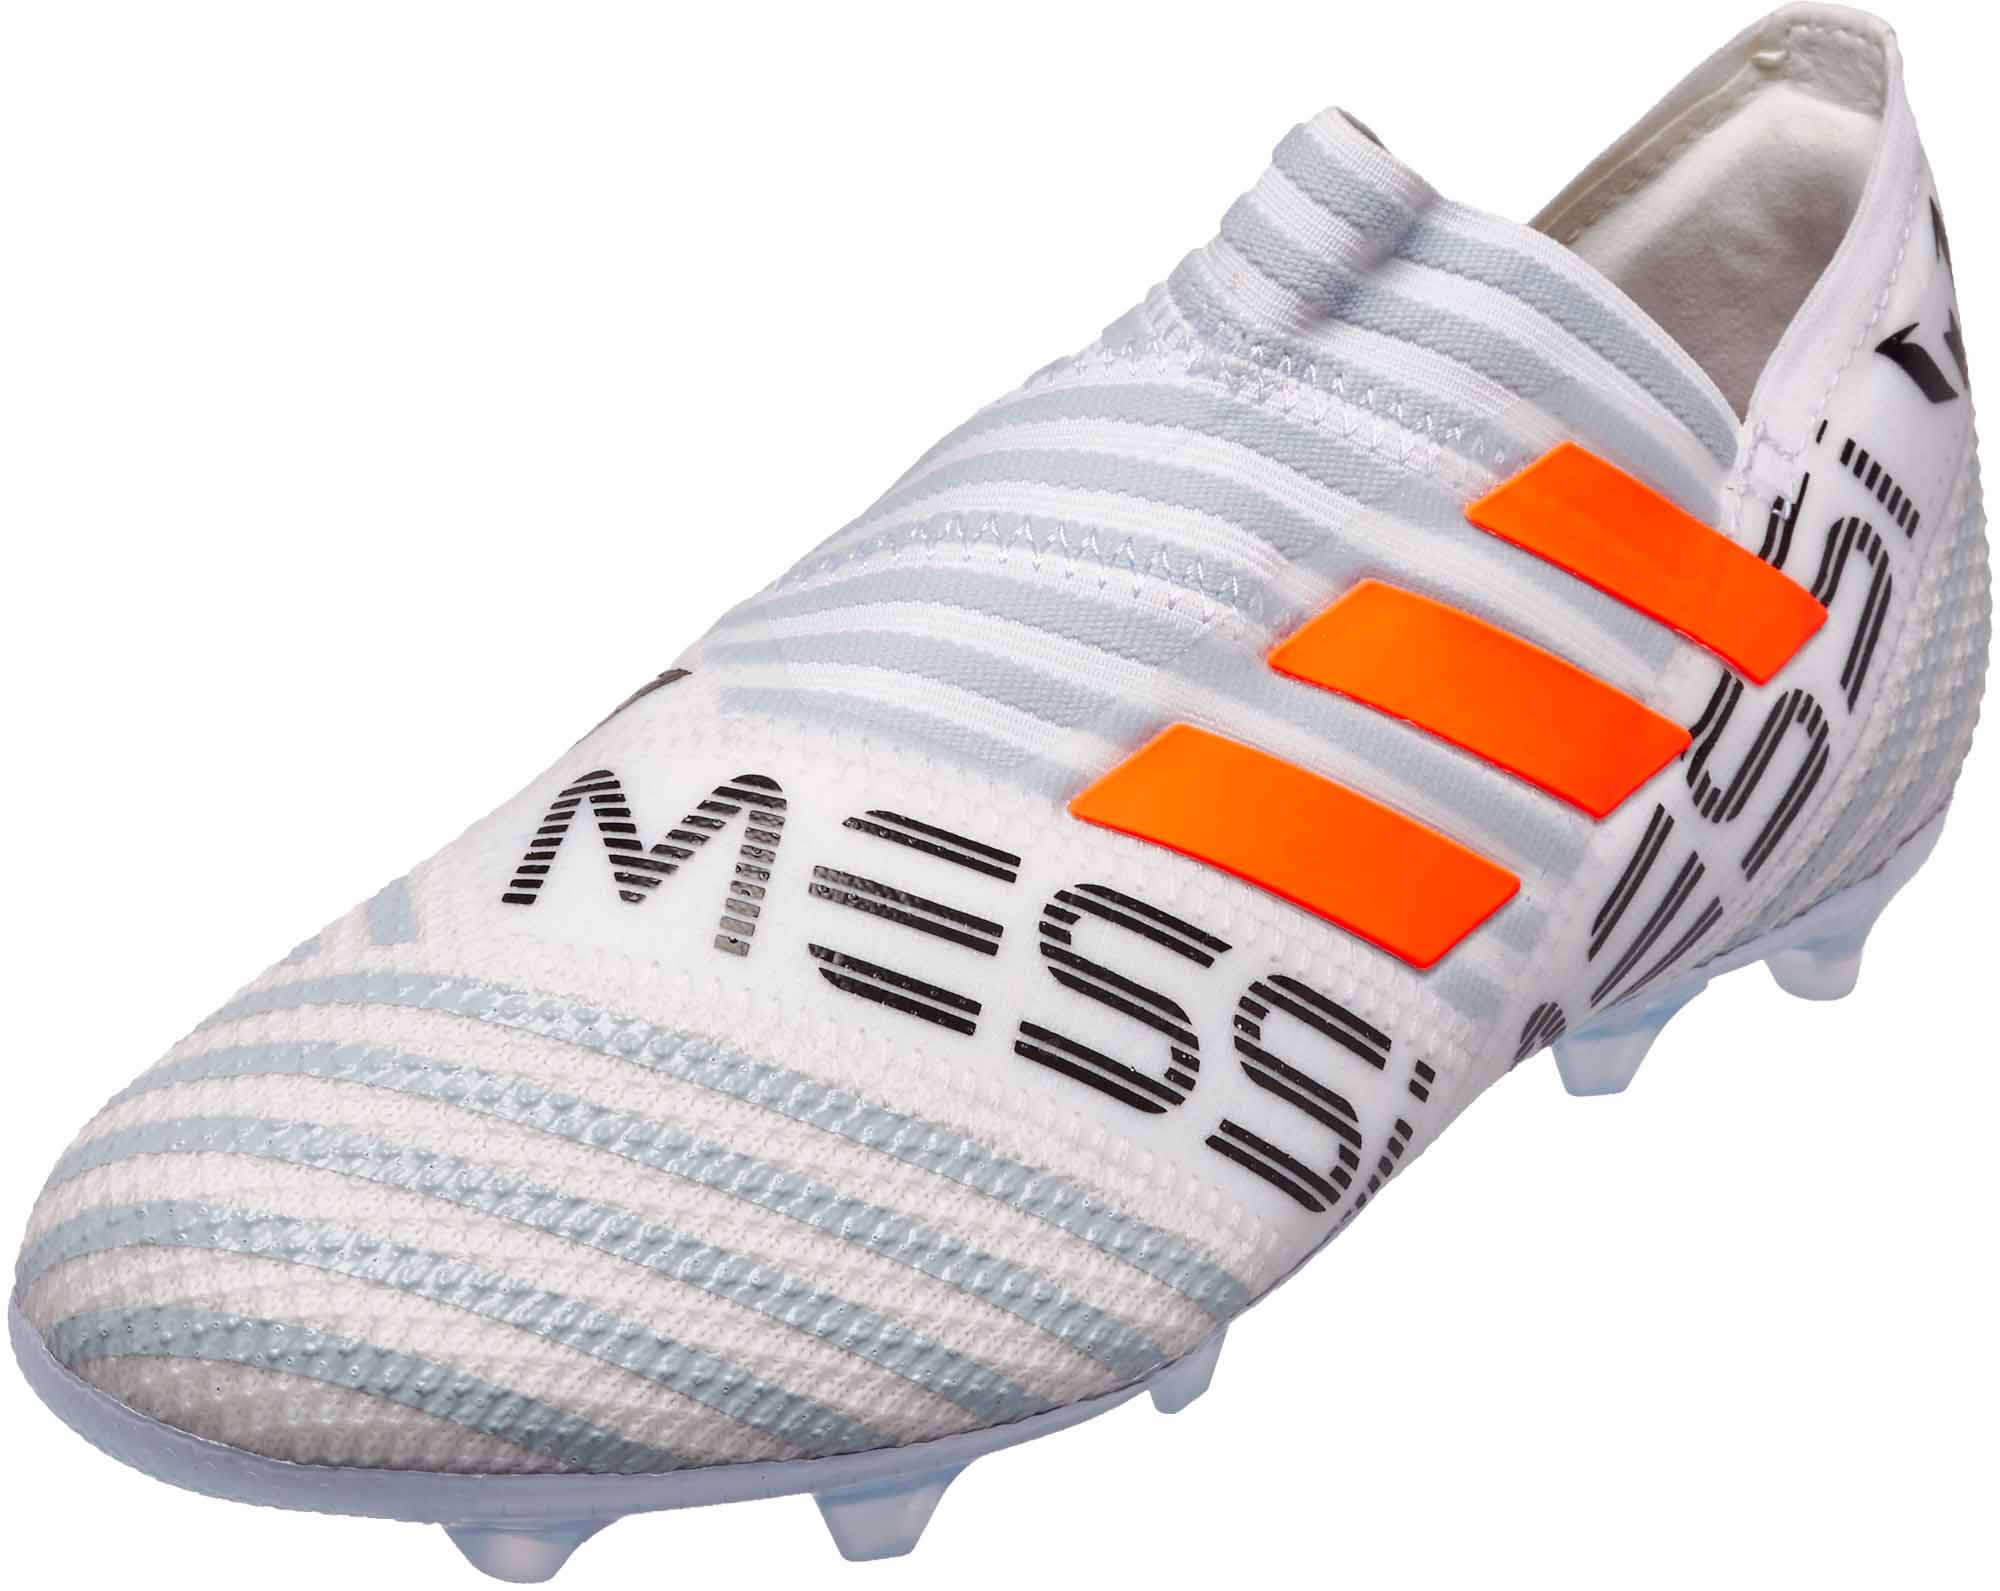 messi soccer cleats for kids